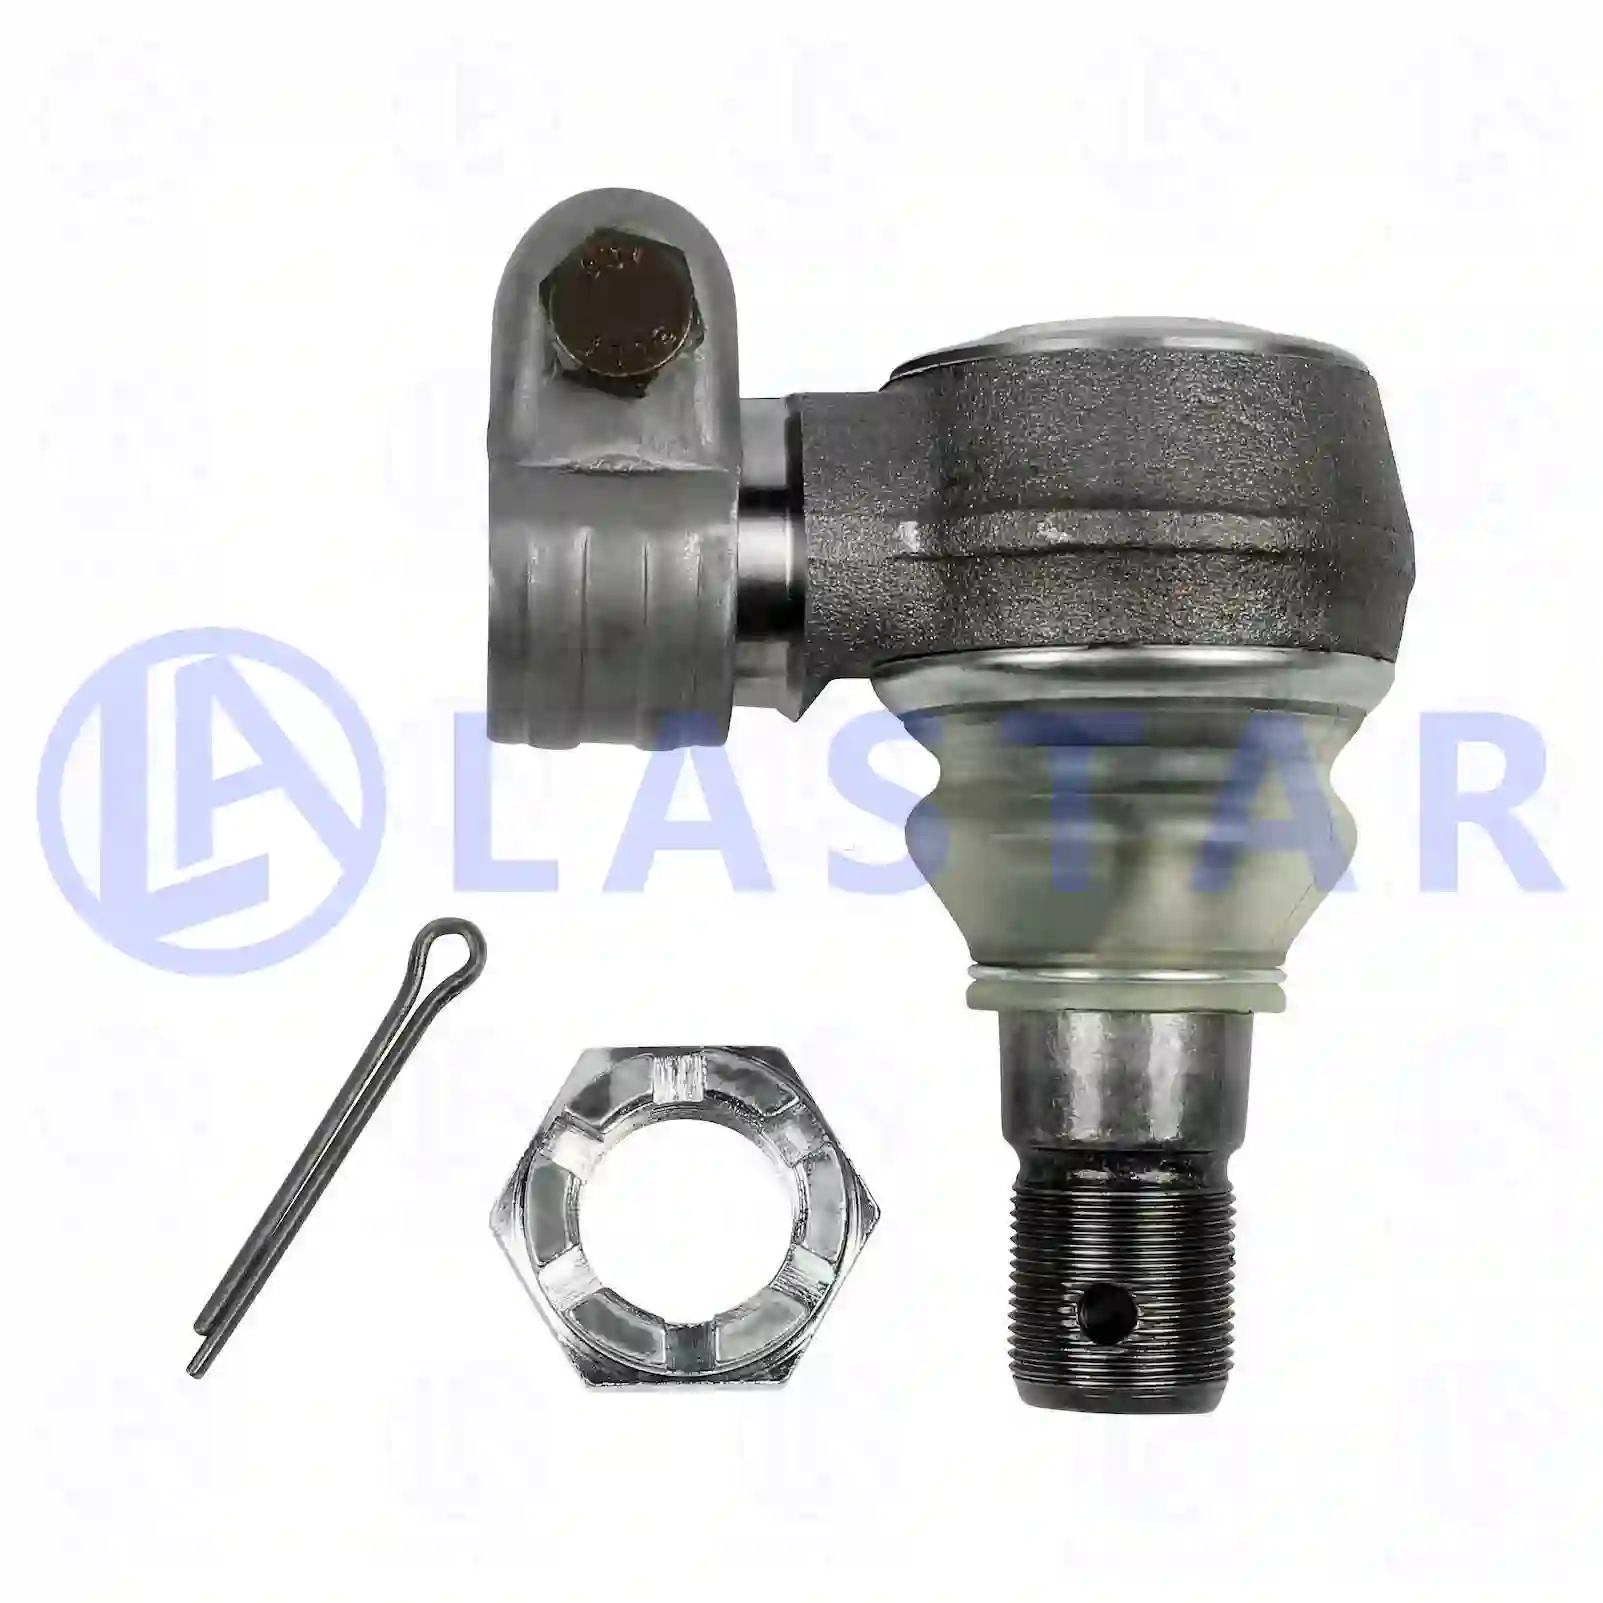 Ball joint, right hand thread, 77705122, 0004605048, 0014601548, 0014601648, 0024600648, 5001830480, 5001845430, ZG40406-0008 ||  77705122 Lastar Spare Part | Truck Spare Parts, Auotomotive Spare Parts Ball joint, right hand thread, 77705122, 0004605048, 0014601548, 0014601648, 0024600648, 5001830480, 5001845430, ZG40406-0008 ||  77705122 Lastar Spare Part | Truck Spare Parts, Auotomotive Spare Parts